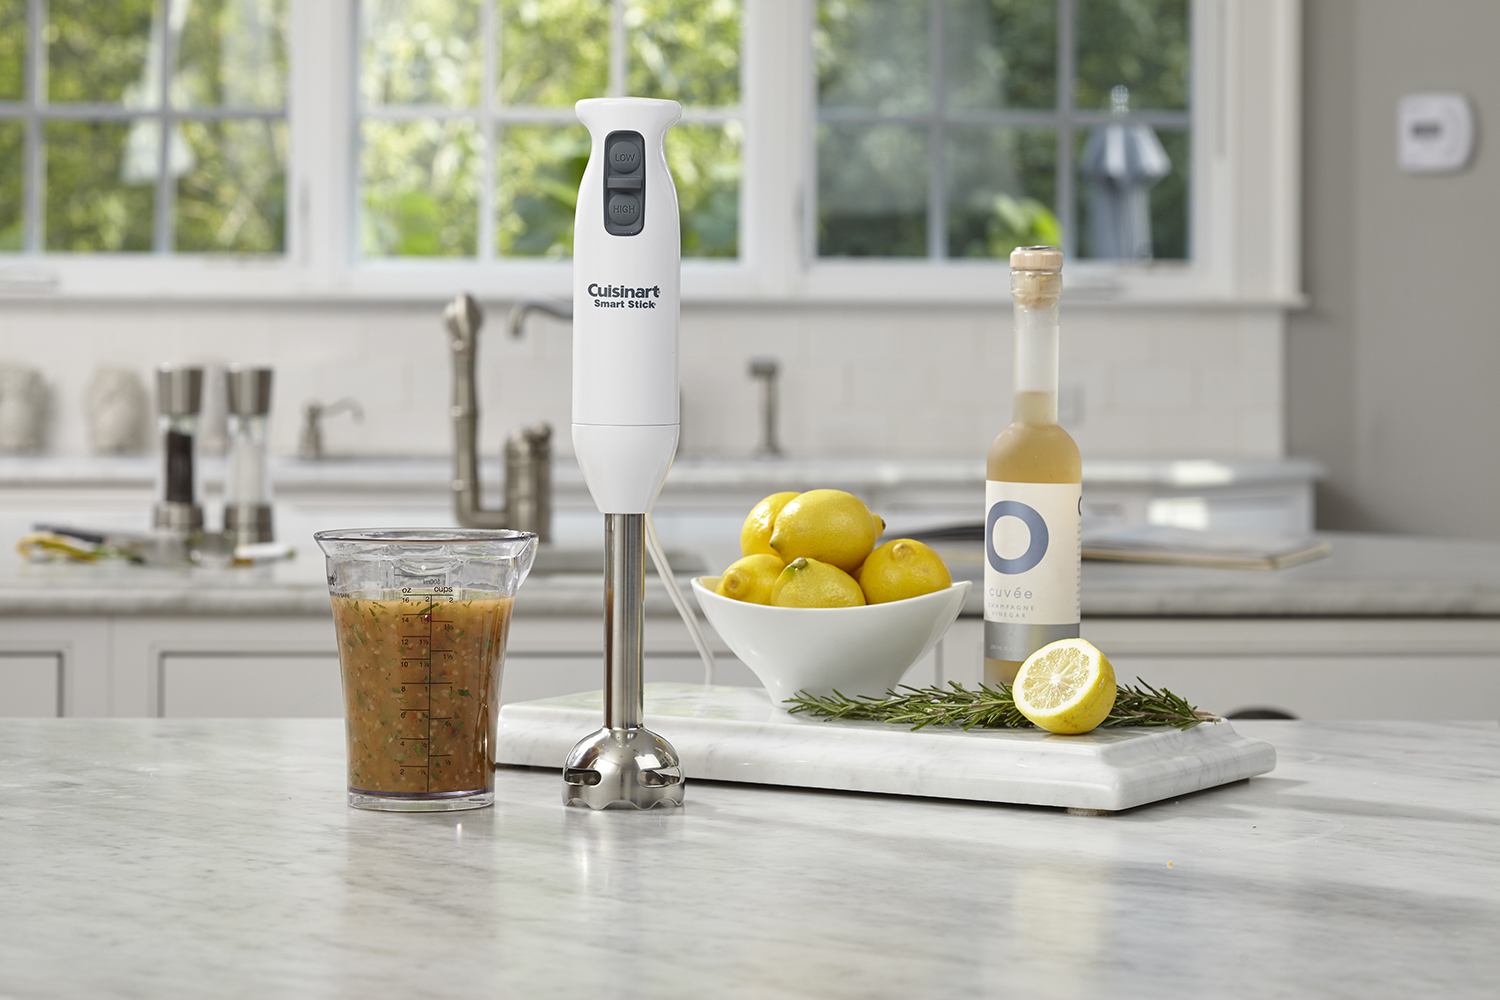  Cuisinart CSB-75 Smart Stick 2-Speed Immersion Hand Blender,  White: Electric Hand Blenders: Home & Kitchen